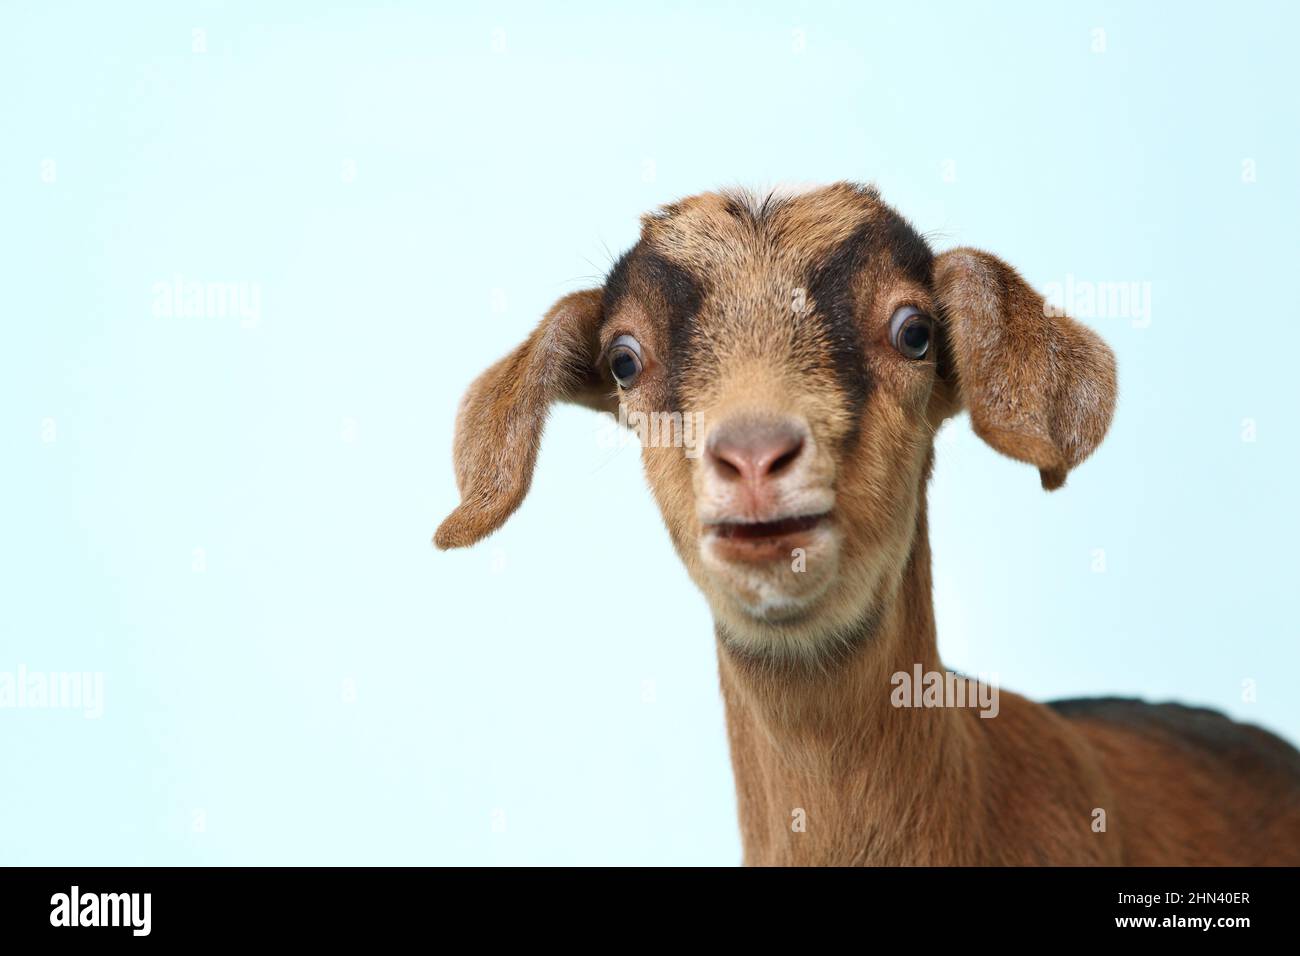 Domestic goat. Portrait of kid, seen against a light-blue background. Germany Stock Photo